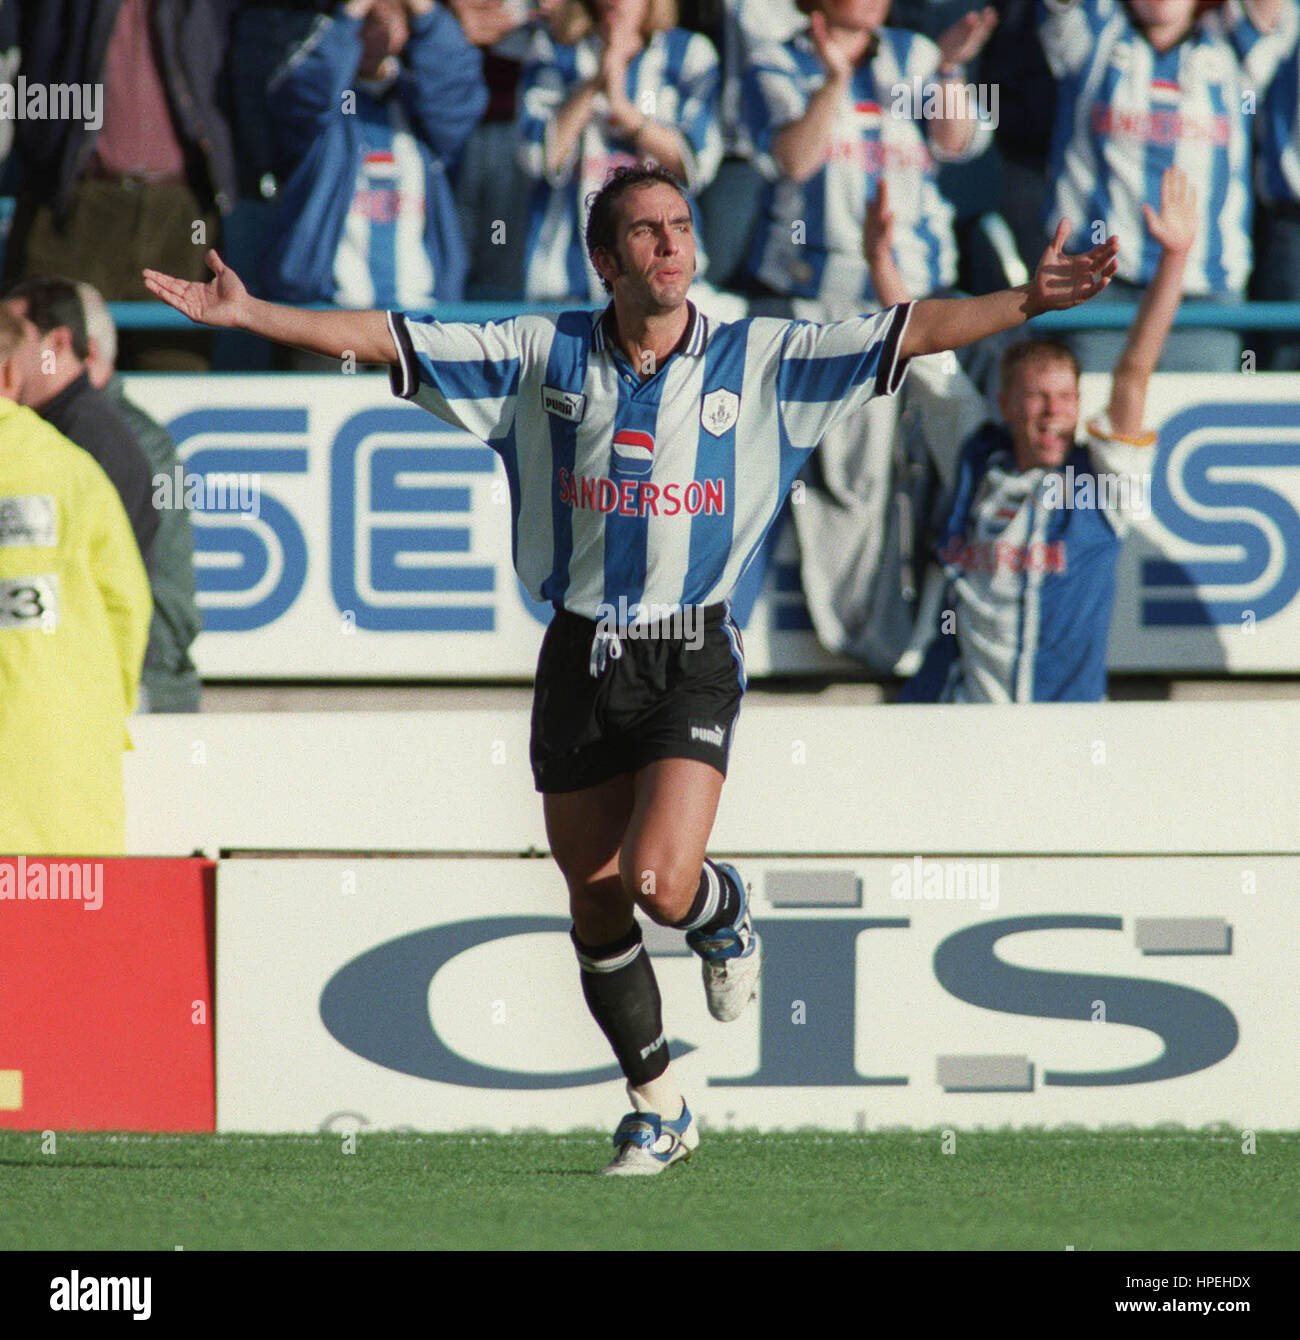 PAOLO DI CANIO SHEFFIELD WEDNESDAY FC 15 August 1997 Stock Photo - Alamy